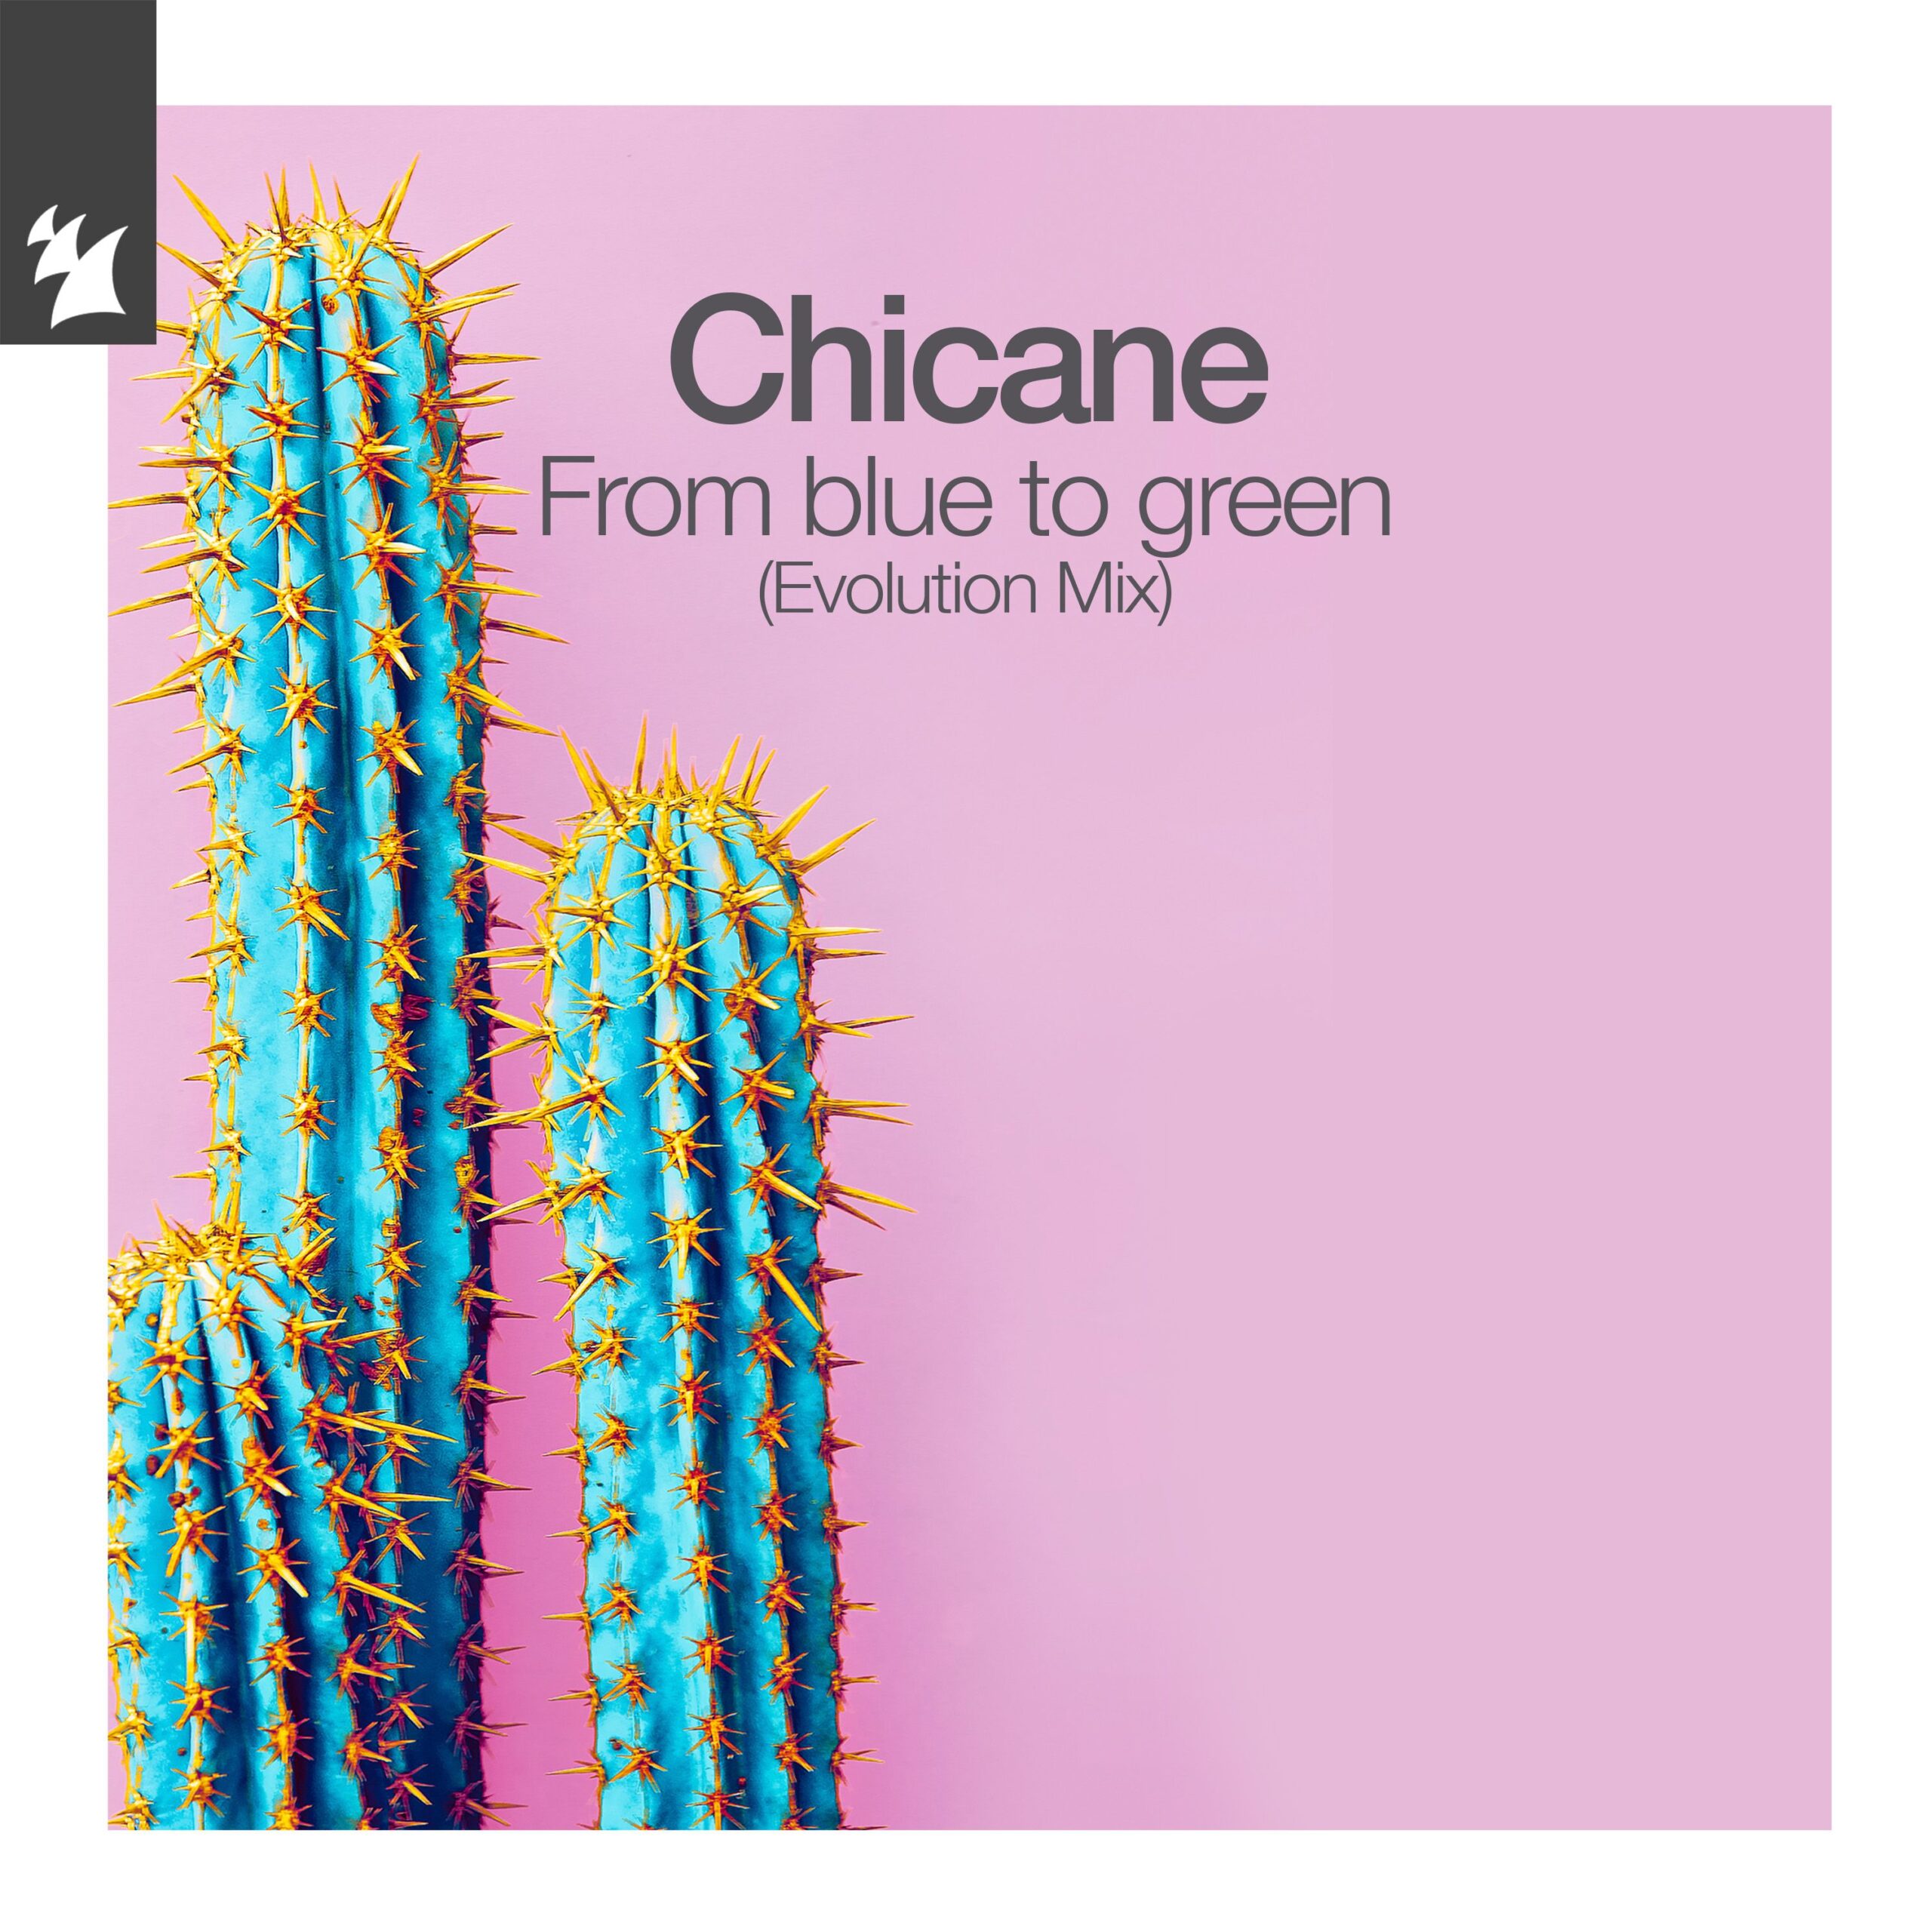 Chicane presents From Blue To Green (Evolution Mix) on Modena Records